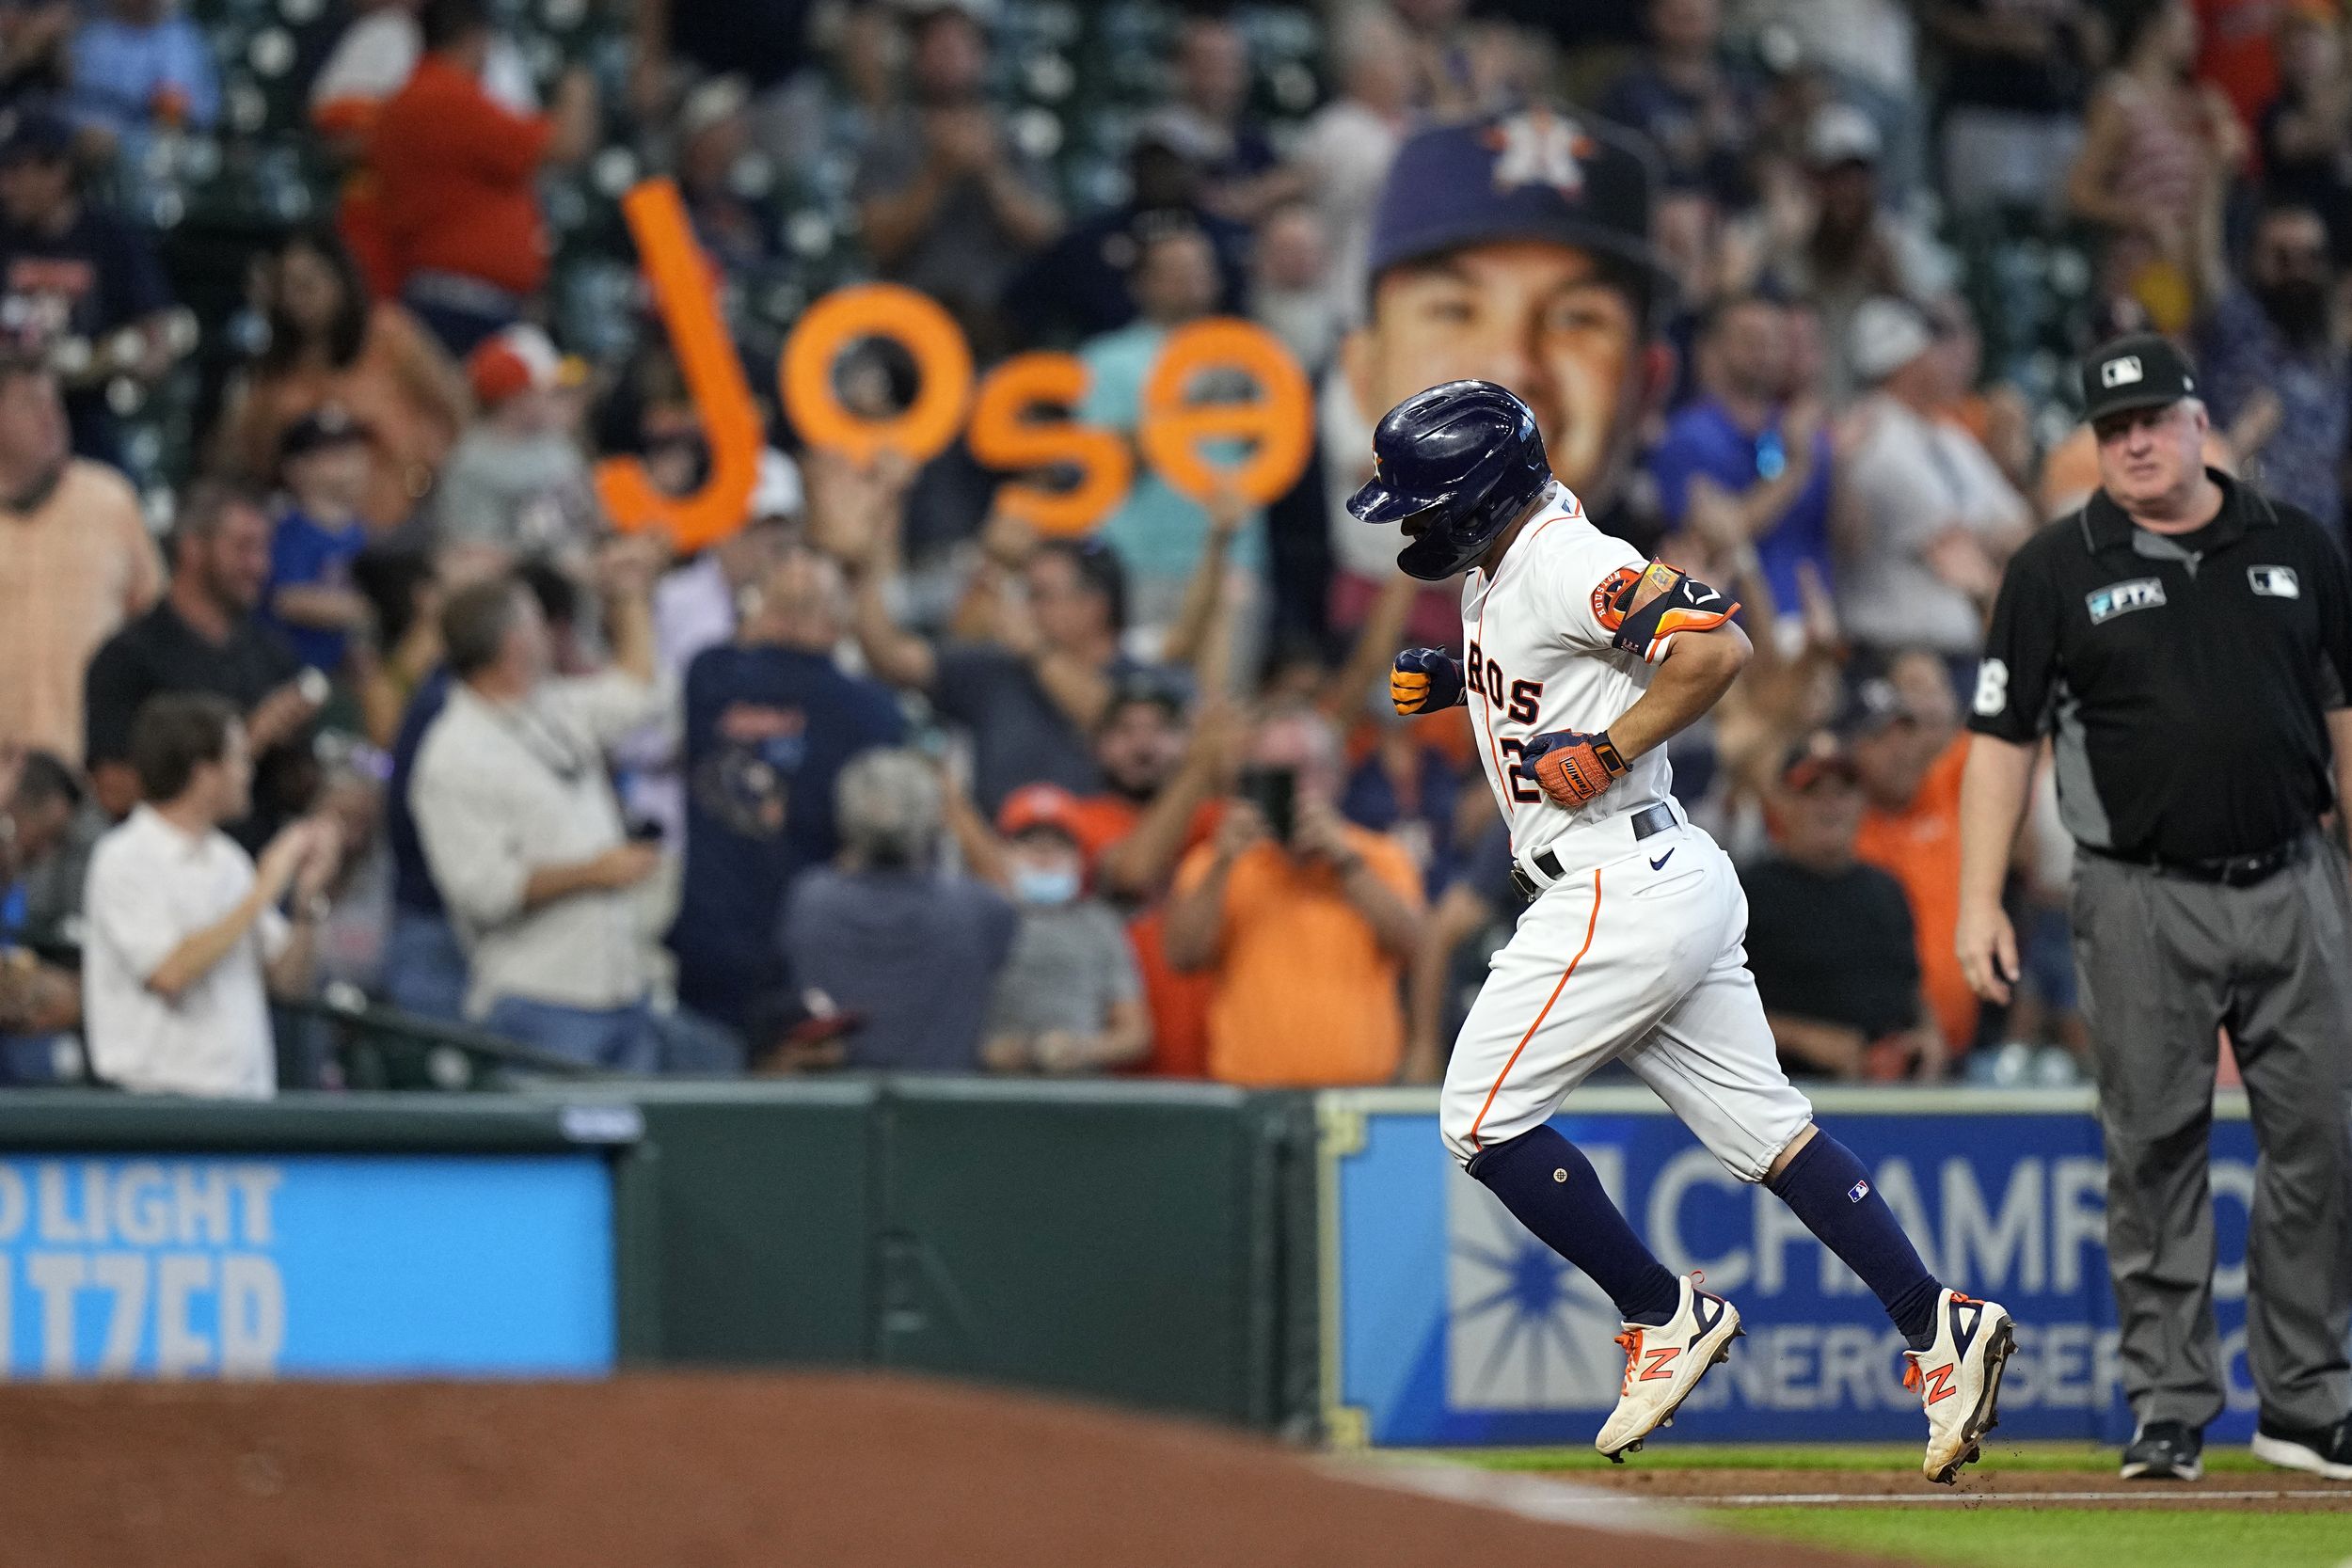 Mariners score nine runs in fourth inning to blow out Astros